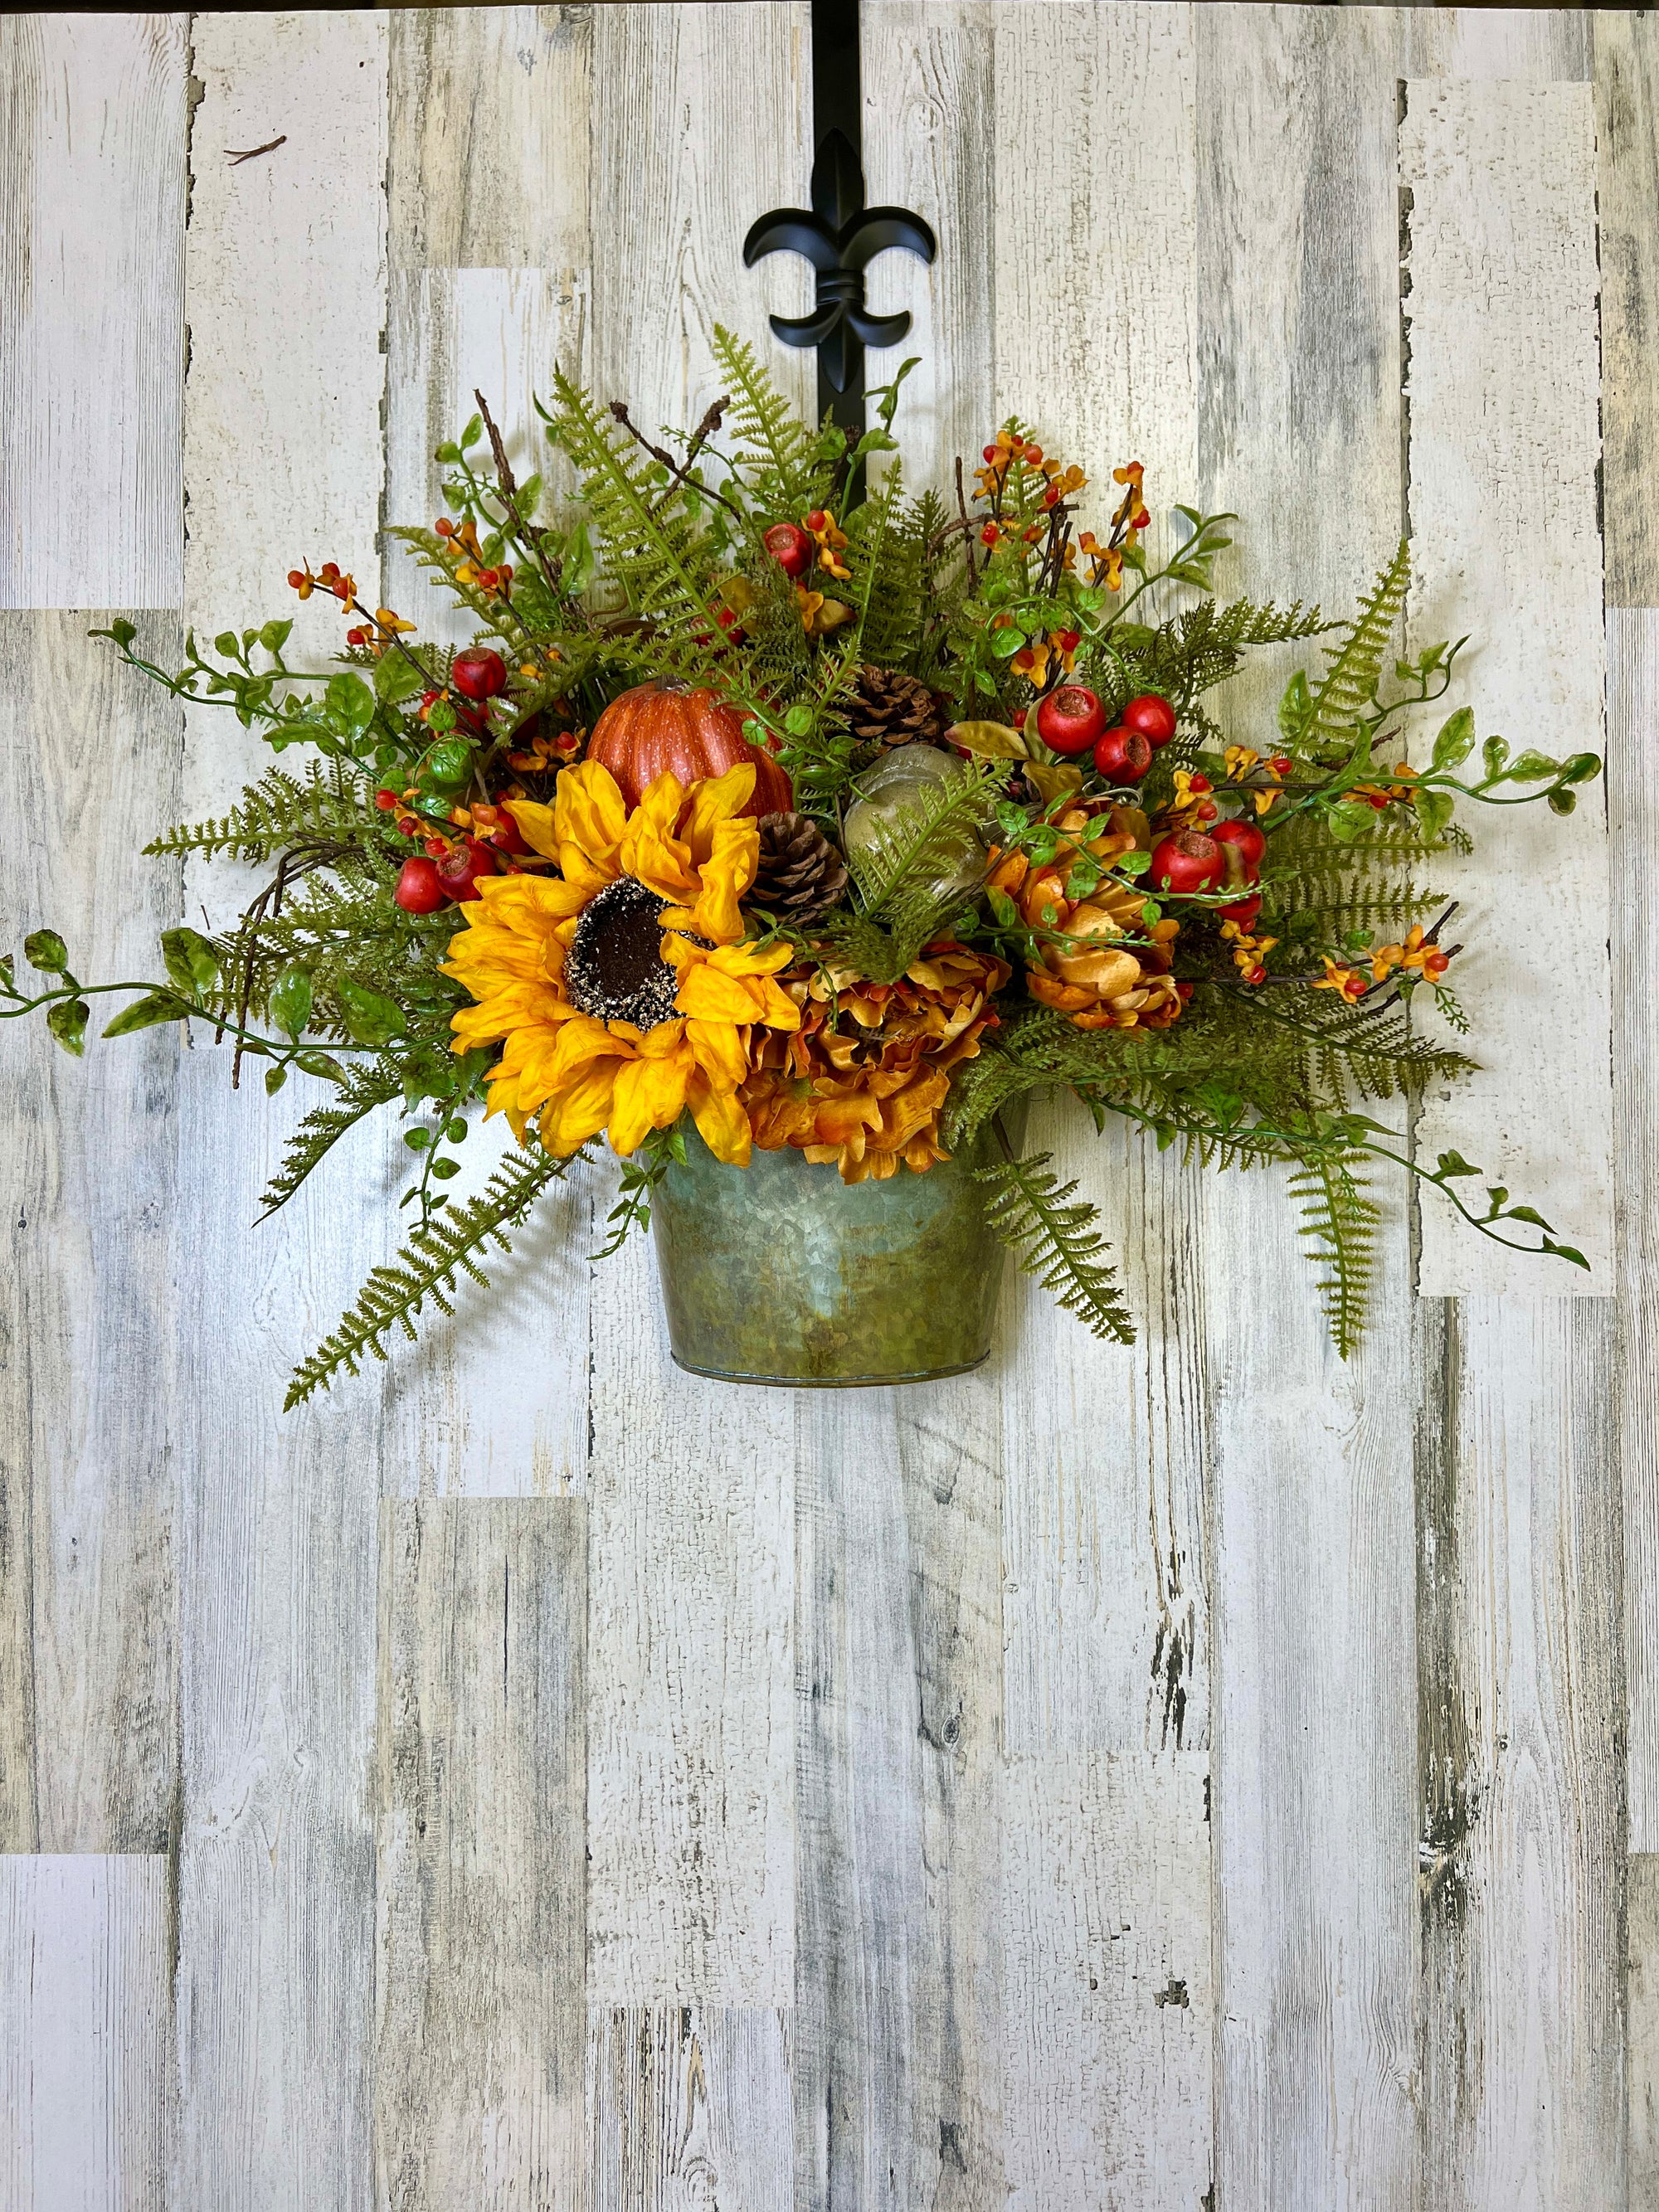 Fall Door Bucket with Yellow Sunflowers and Pumpkins, 20" x 18" x 9" Finished Bucket